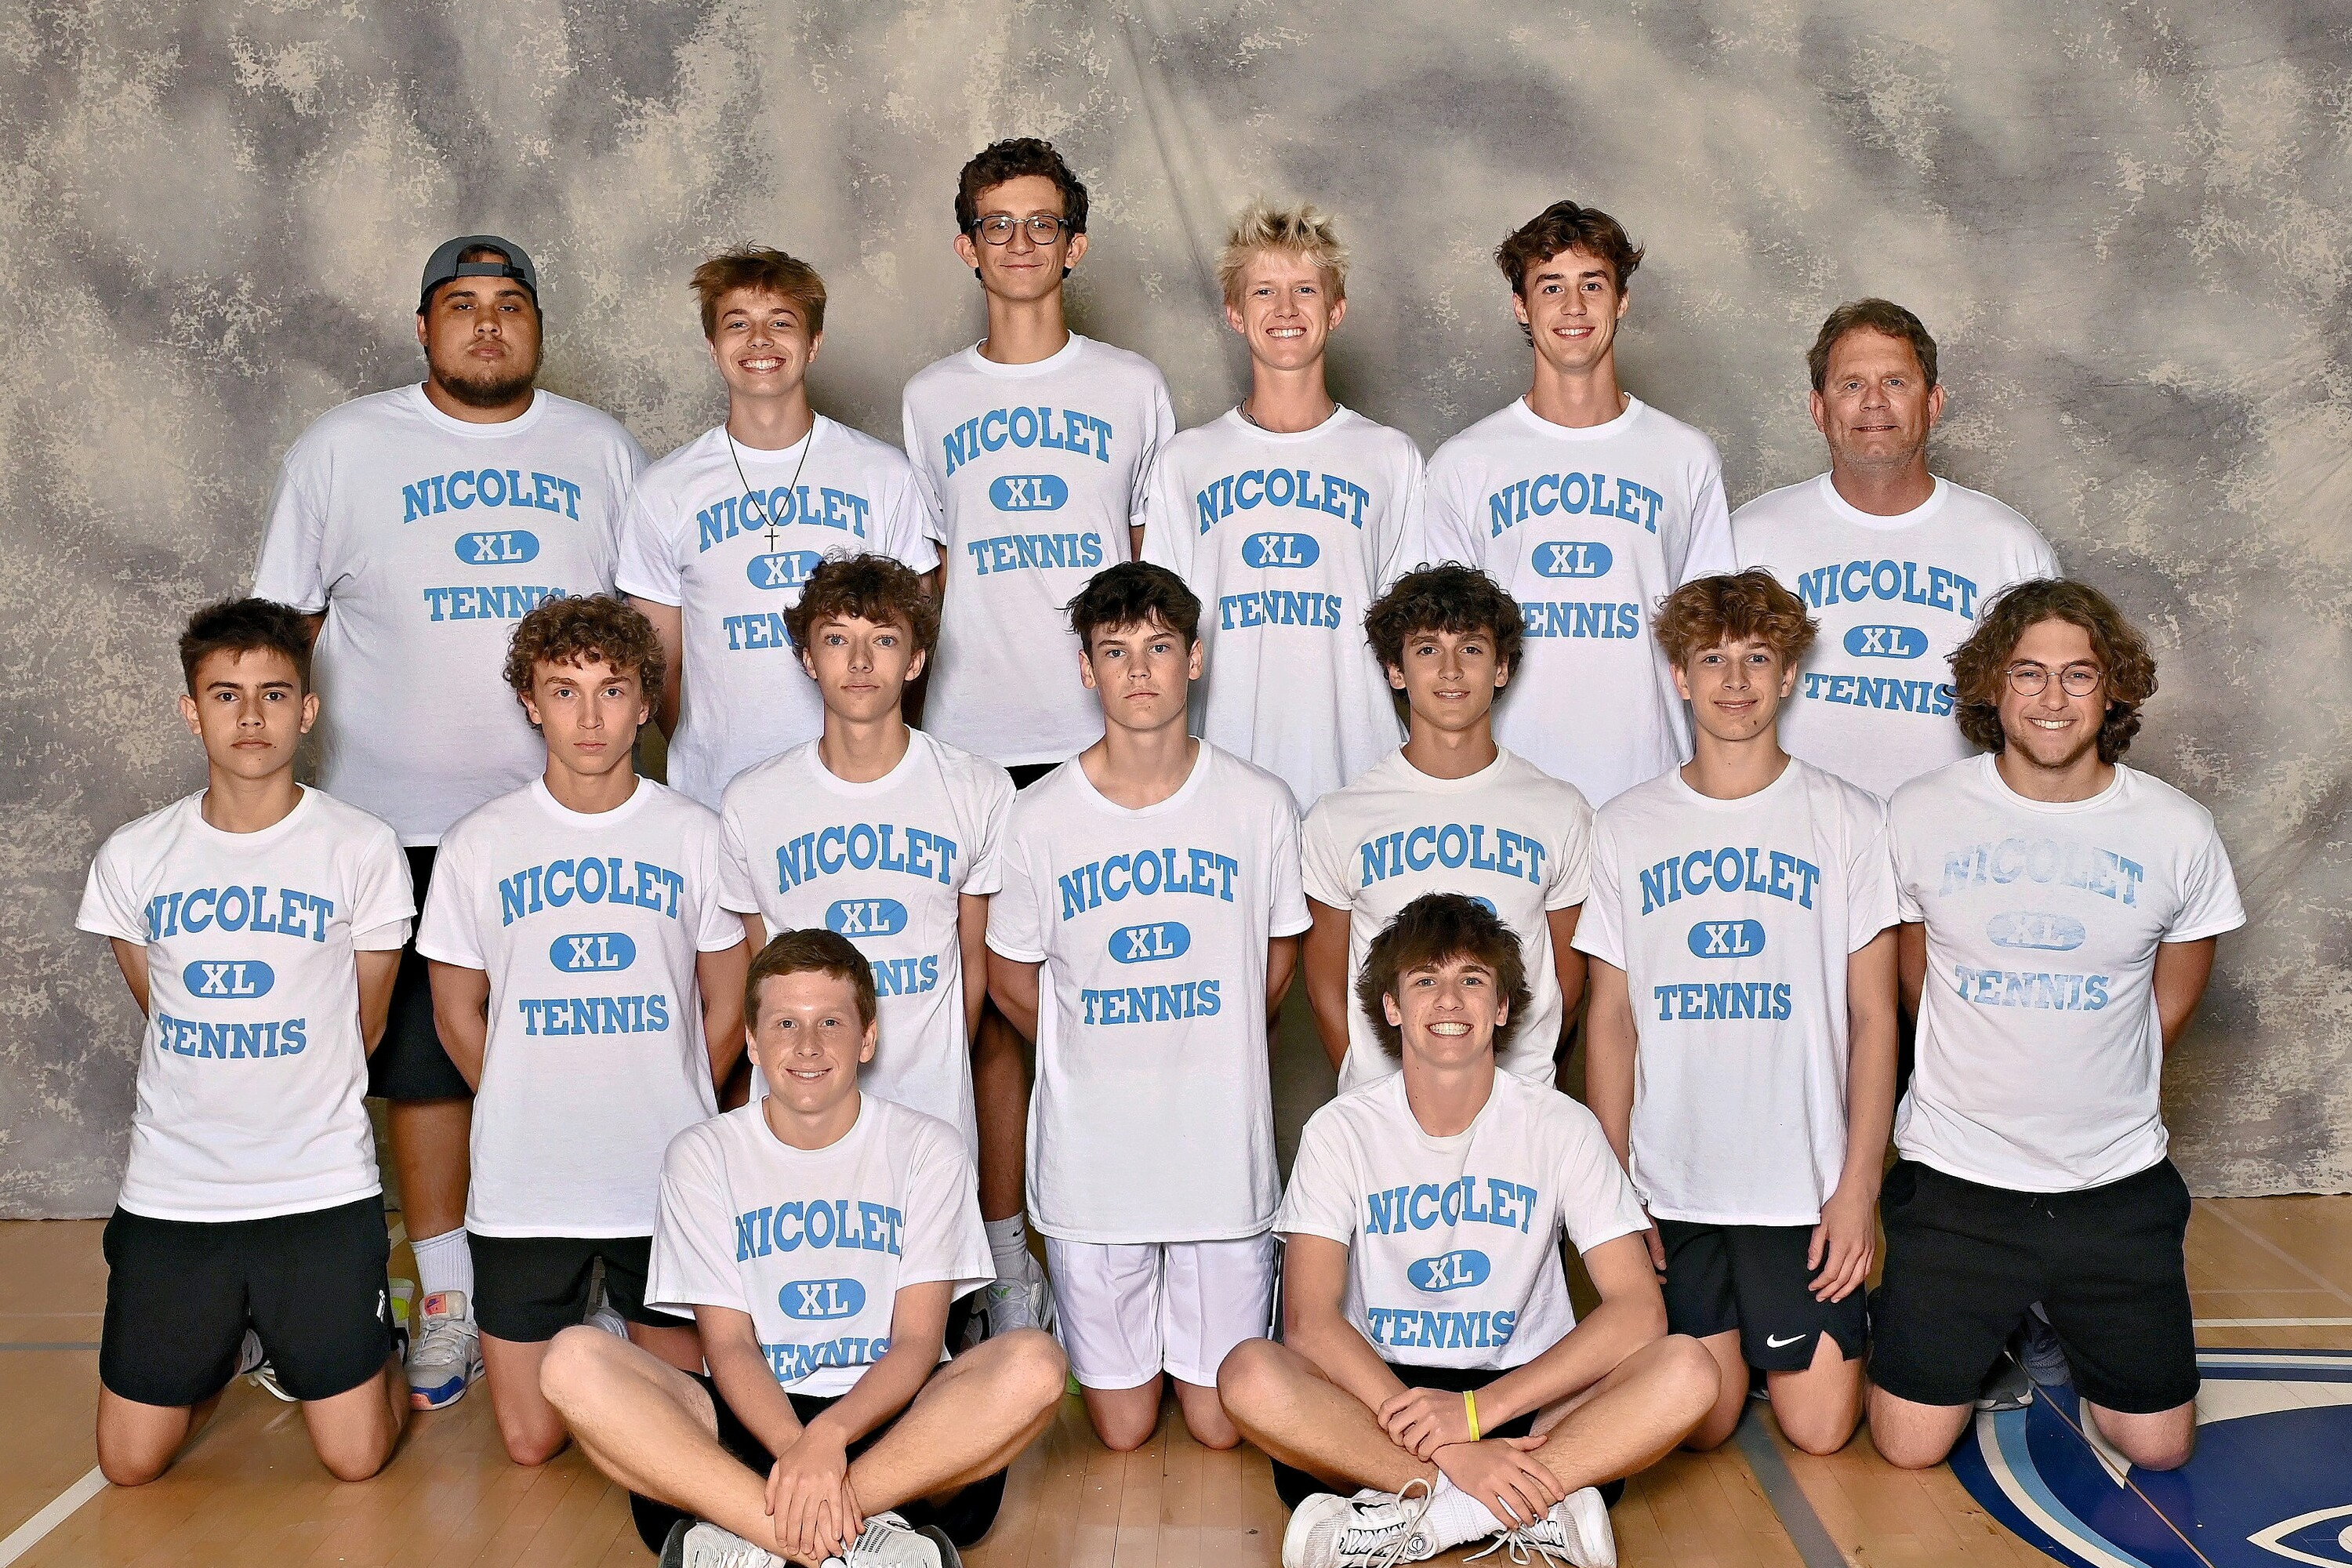 team picture of the boys tennis team posing for a picture 